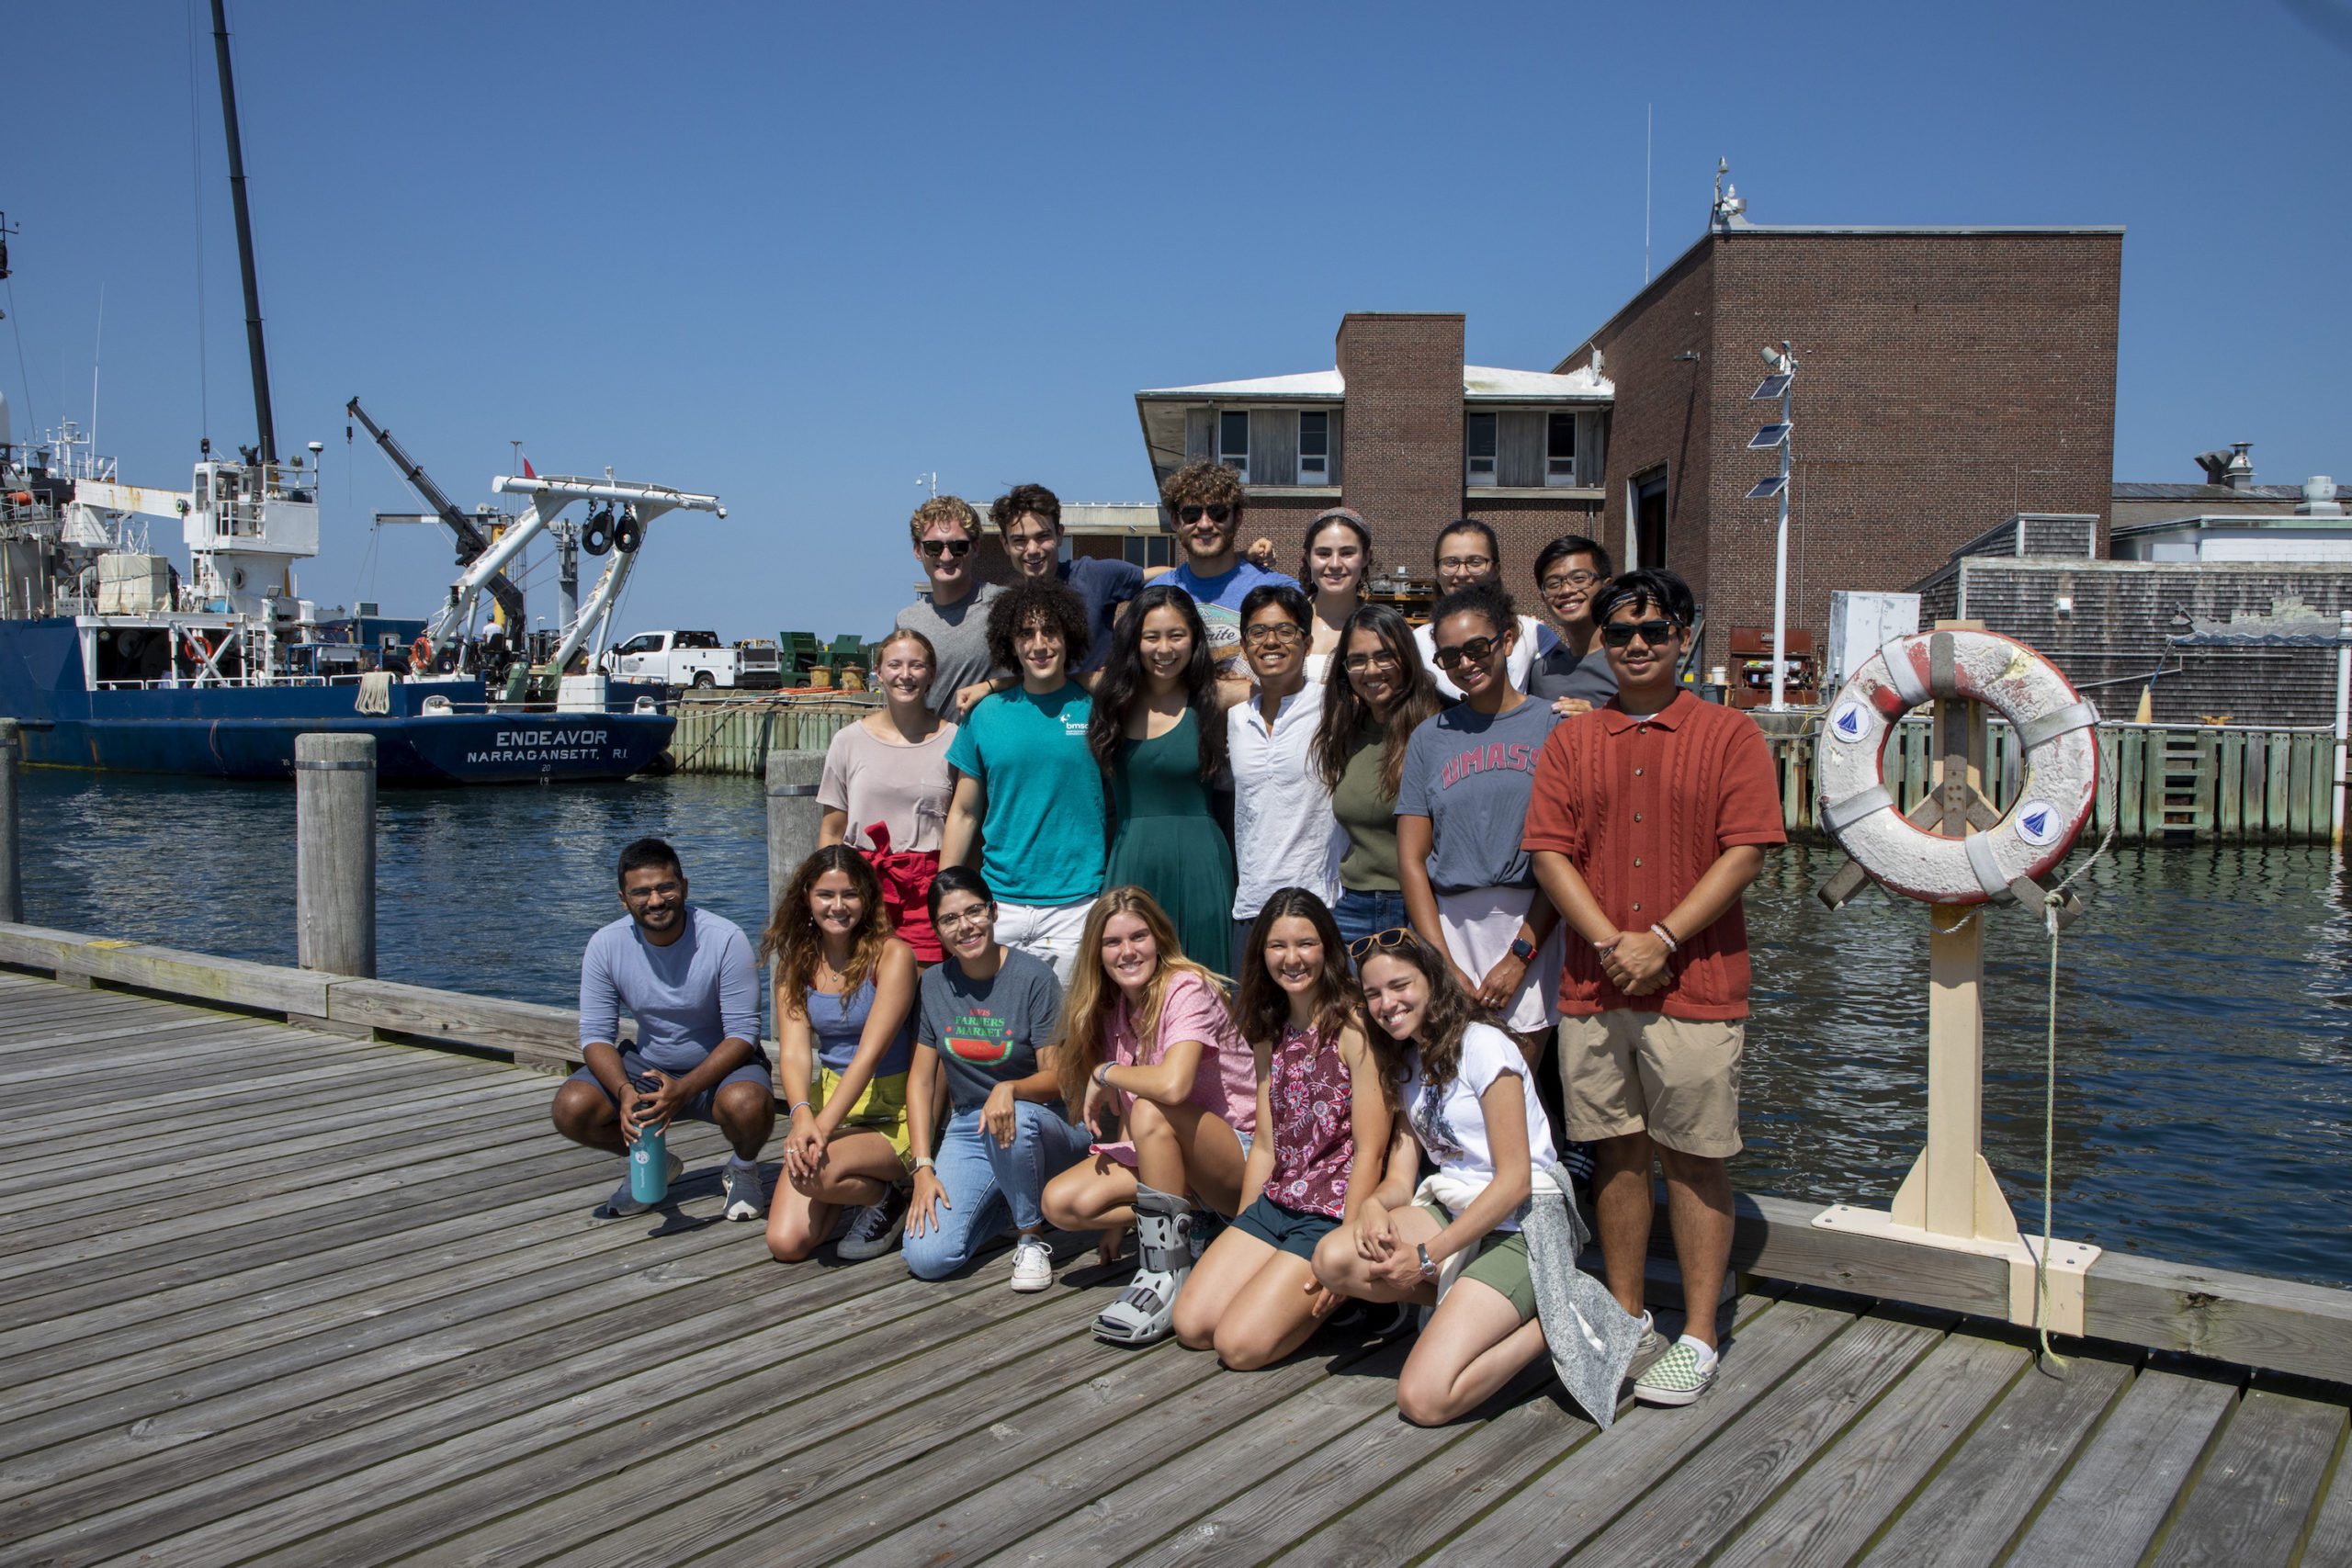 2022 Summer Student Fellows. We welcomed the program back fully in-person, giving students hands-on experience in a broad spectrum of ocean science research. (Jayne Doucette, Woods Hole Oceanographic)